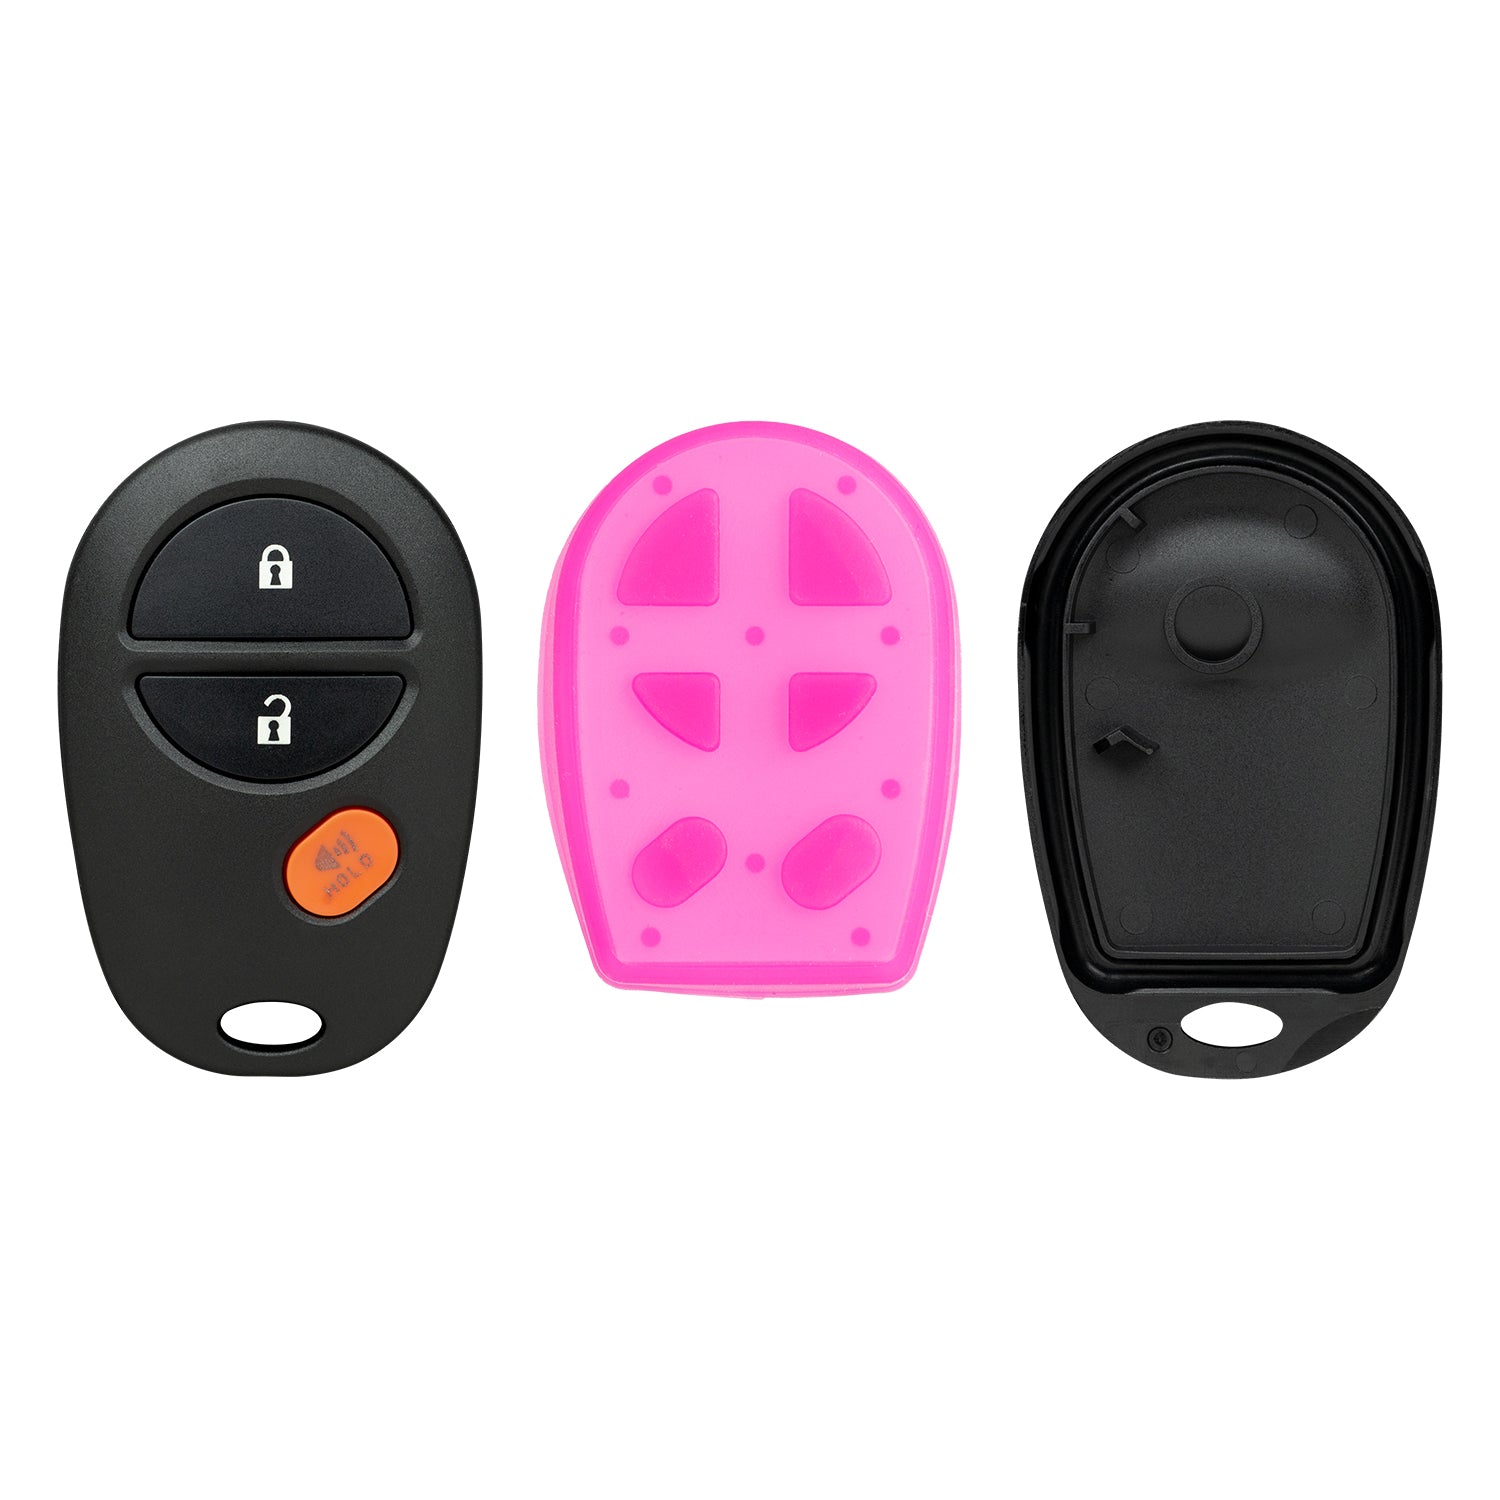 Remote Shell Case for Toyota Tundra Tacoma Sienna Sequoia Highlander GQ43VT20T (3 Button Shell Case)